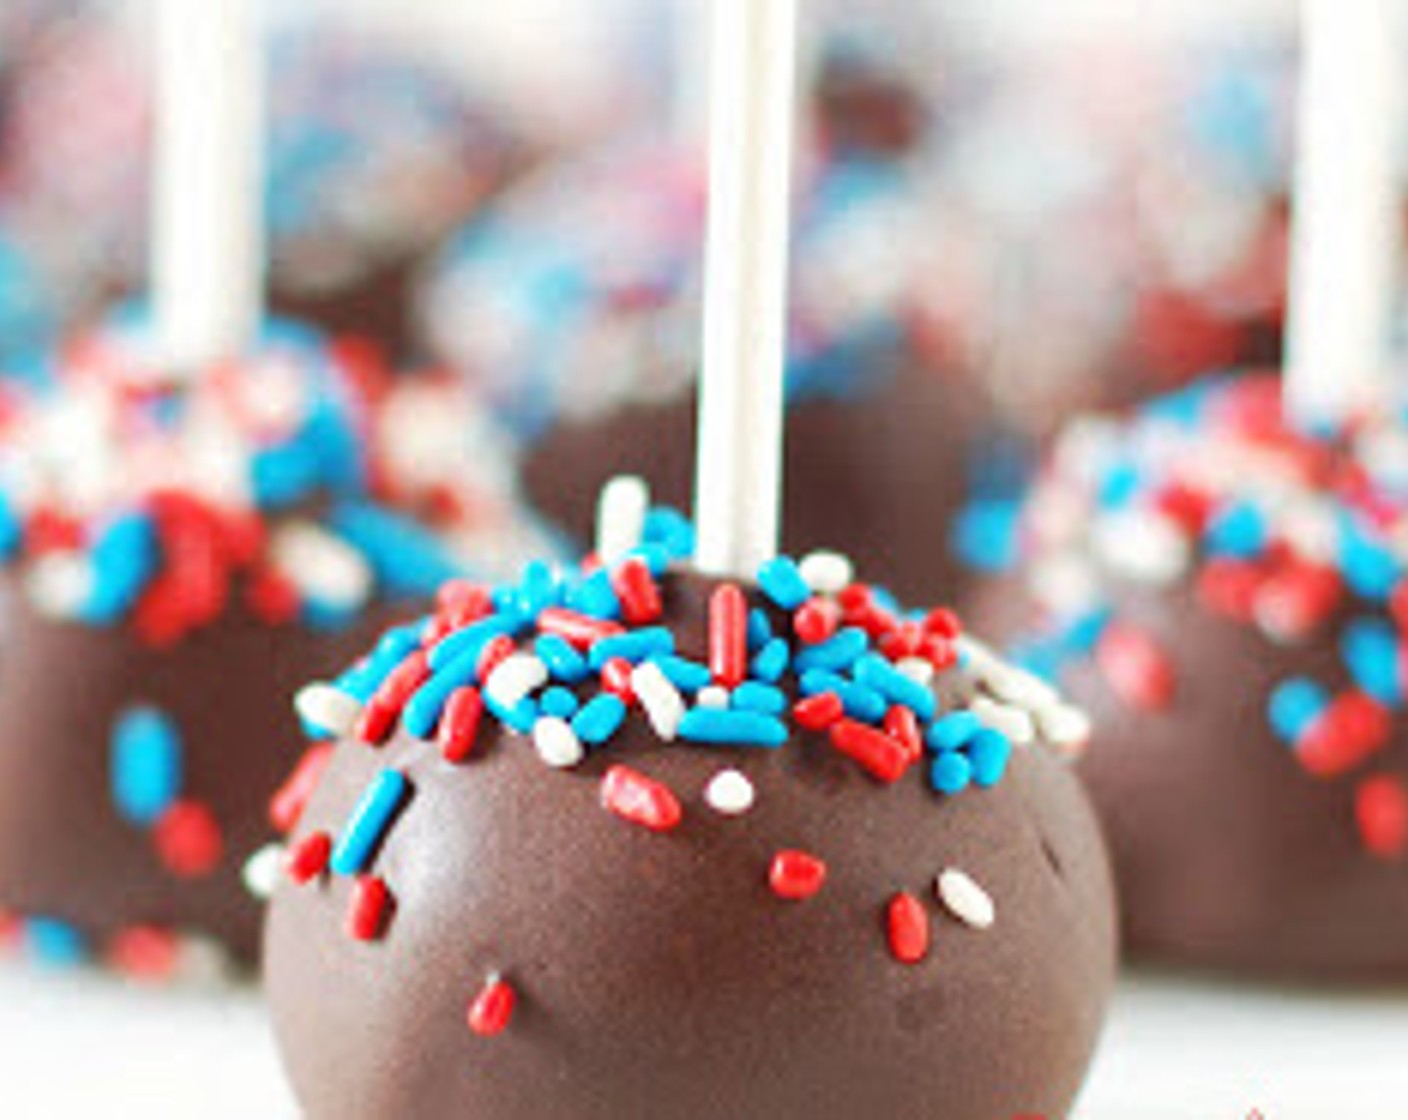 step 8 Once the candy melt has hardened you are free to eat one! Do try to place the rest in an airtight container and store in the fridge for your party. These truffles can be made ahead of time and refrigerated for 3-4 days.